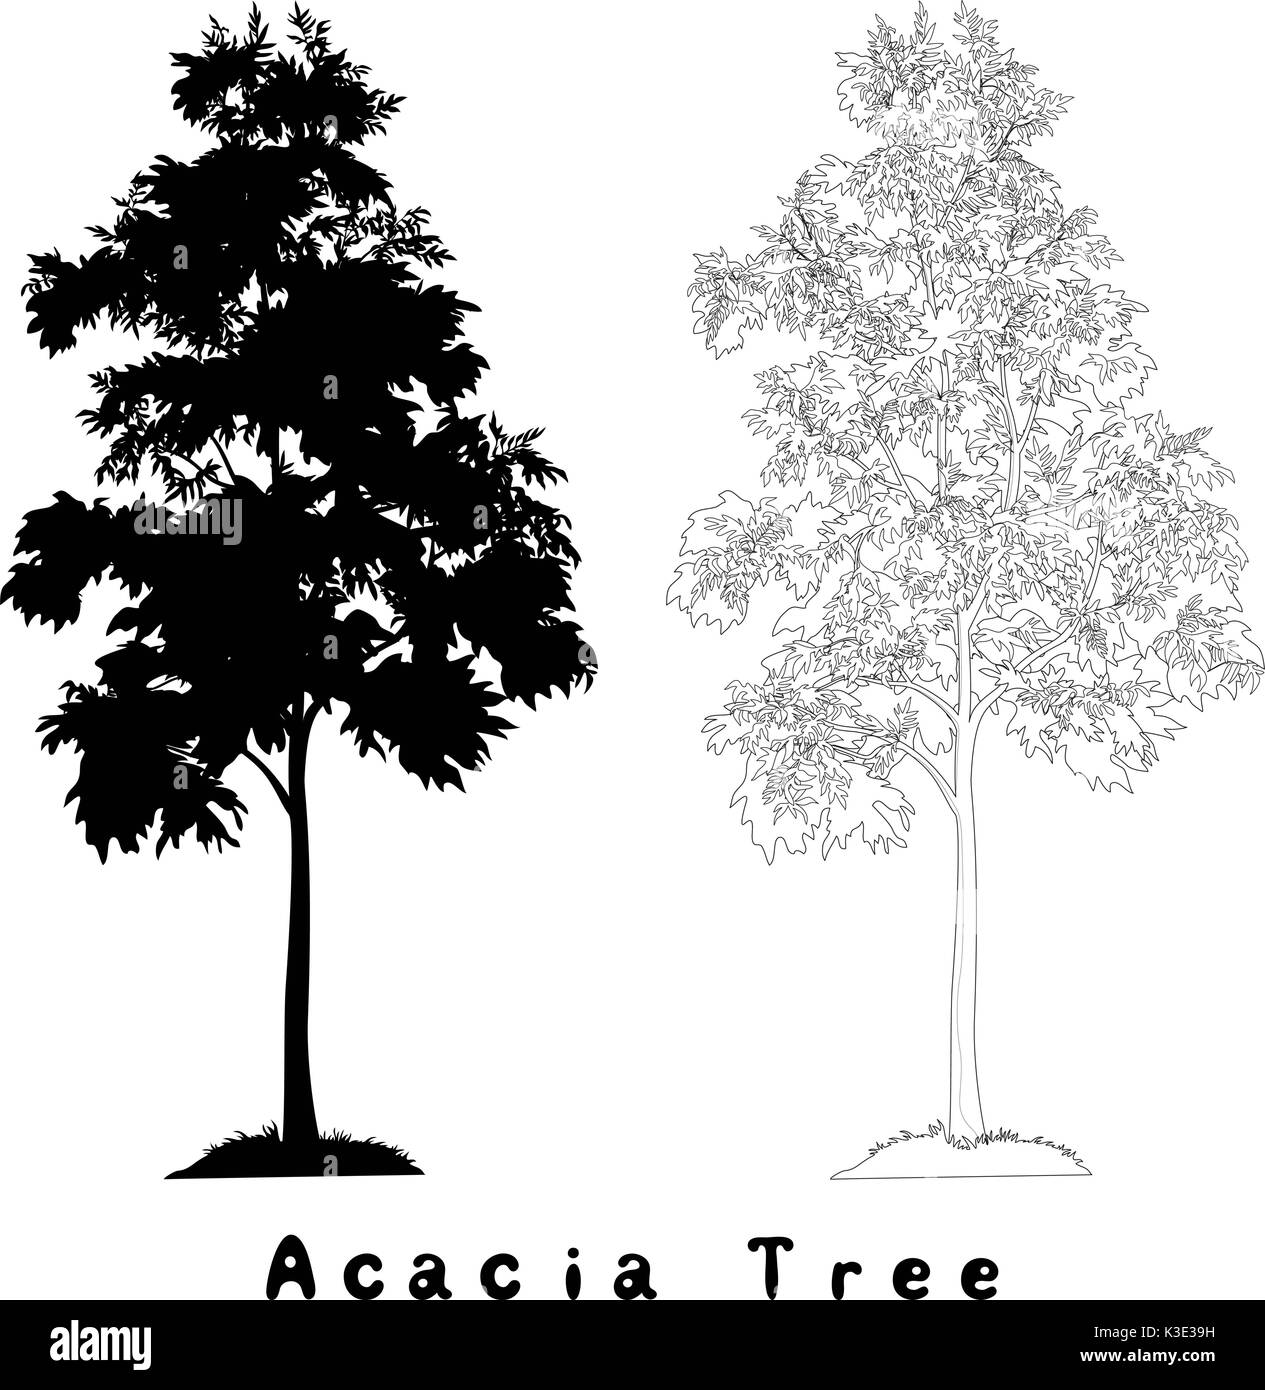 Acacia tree silhouette, contours and inscriptions Stock Vector